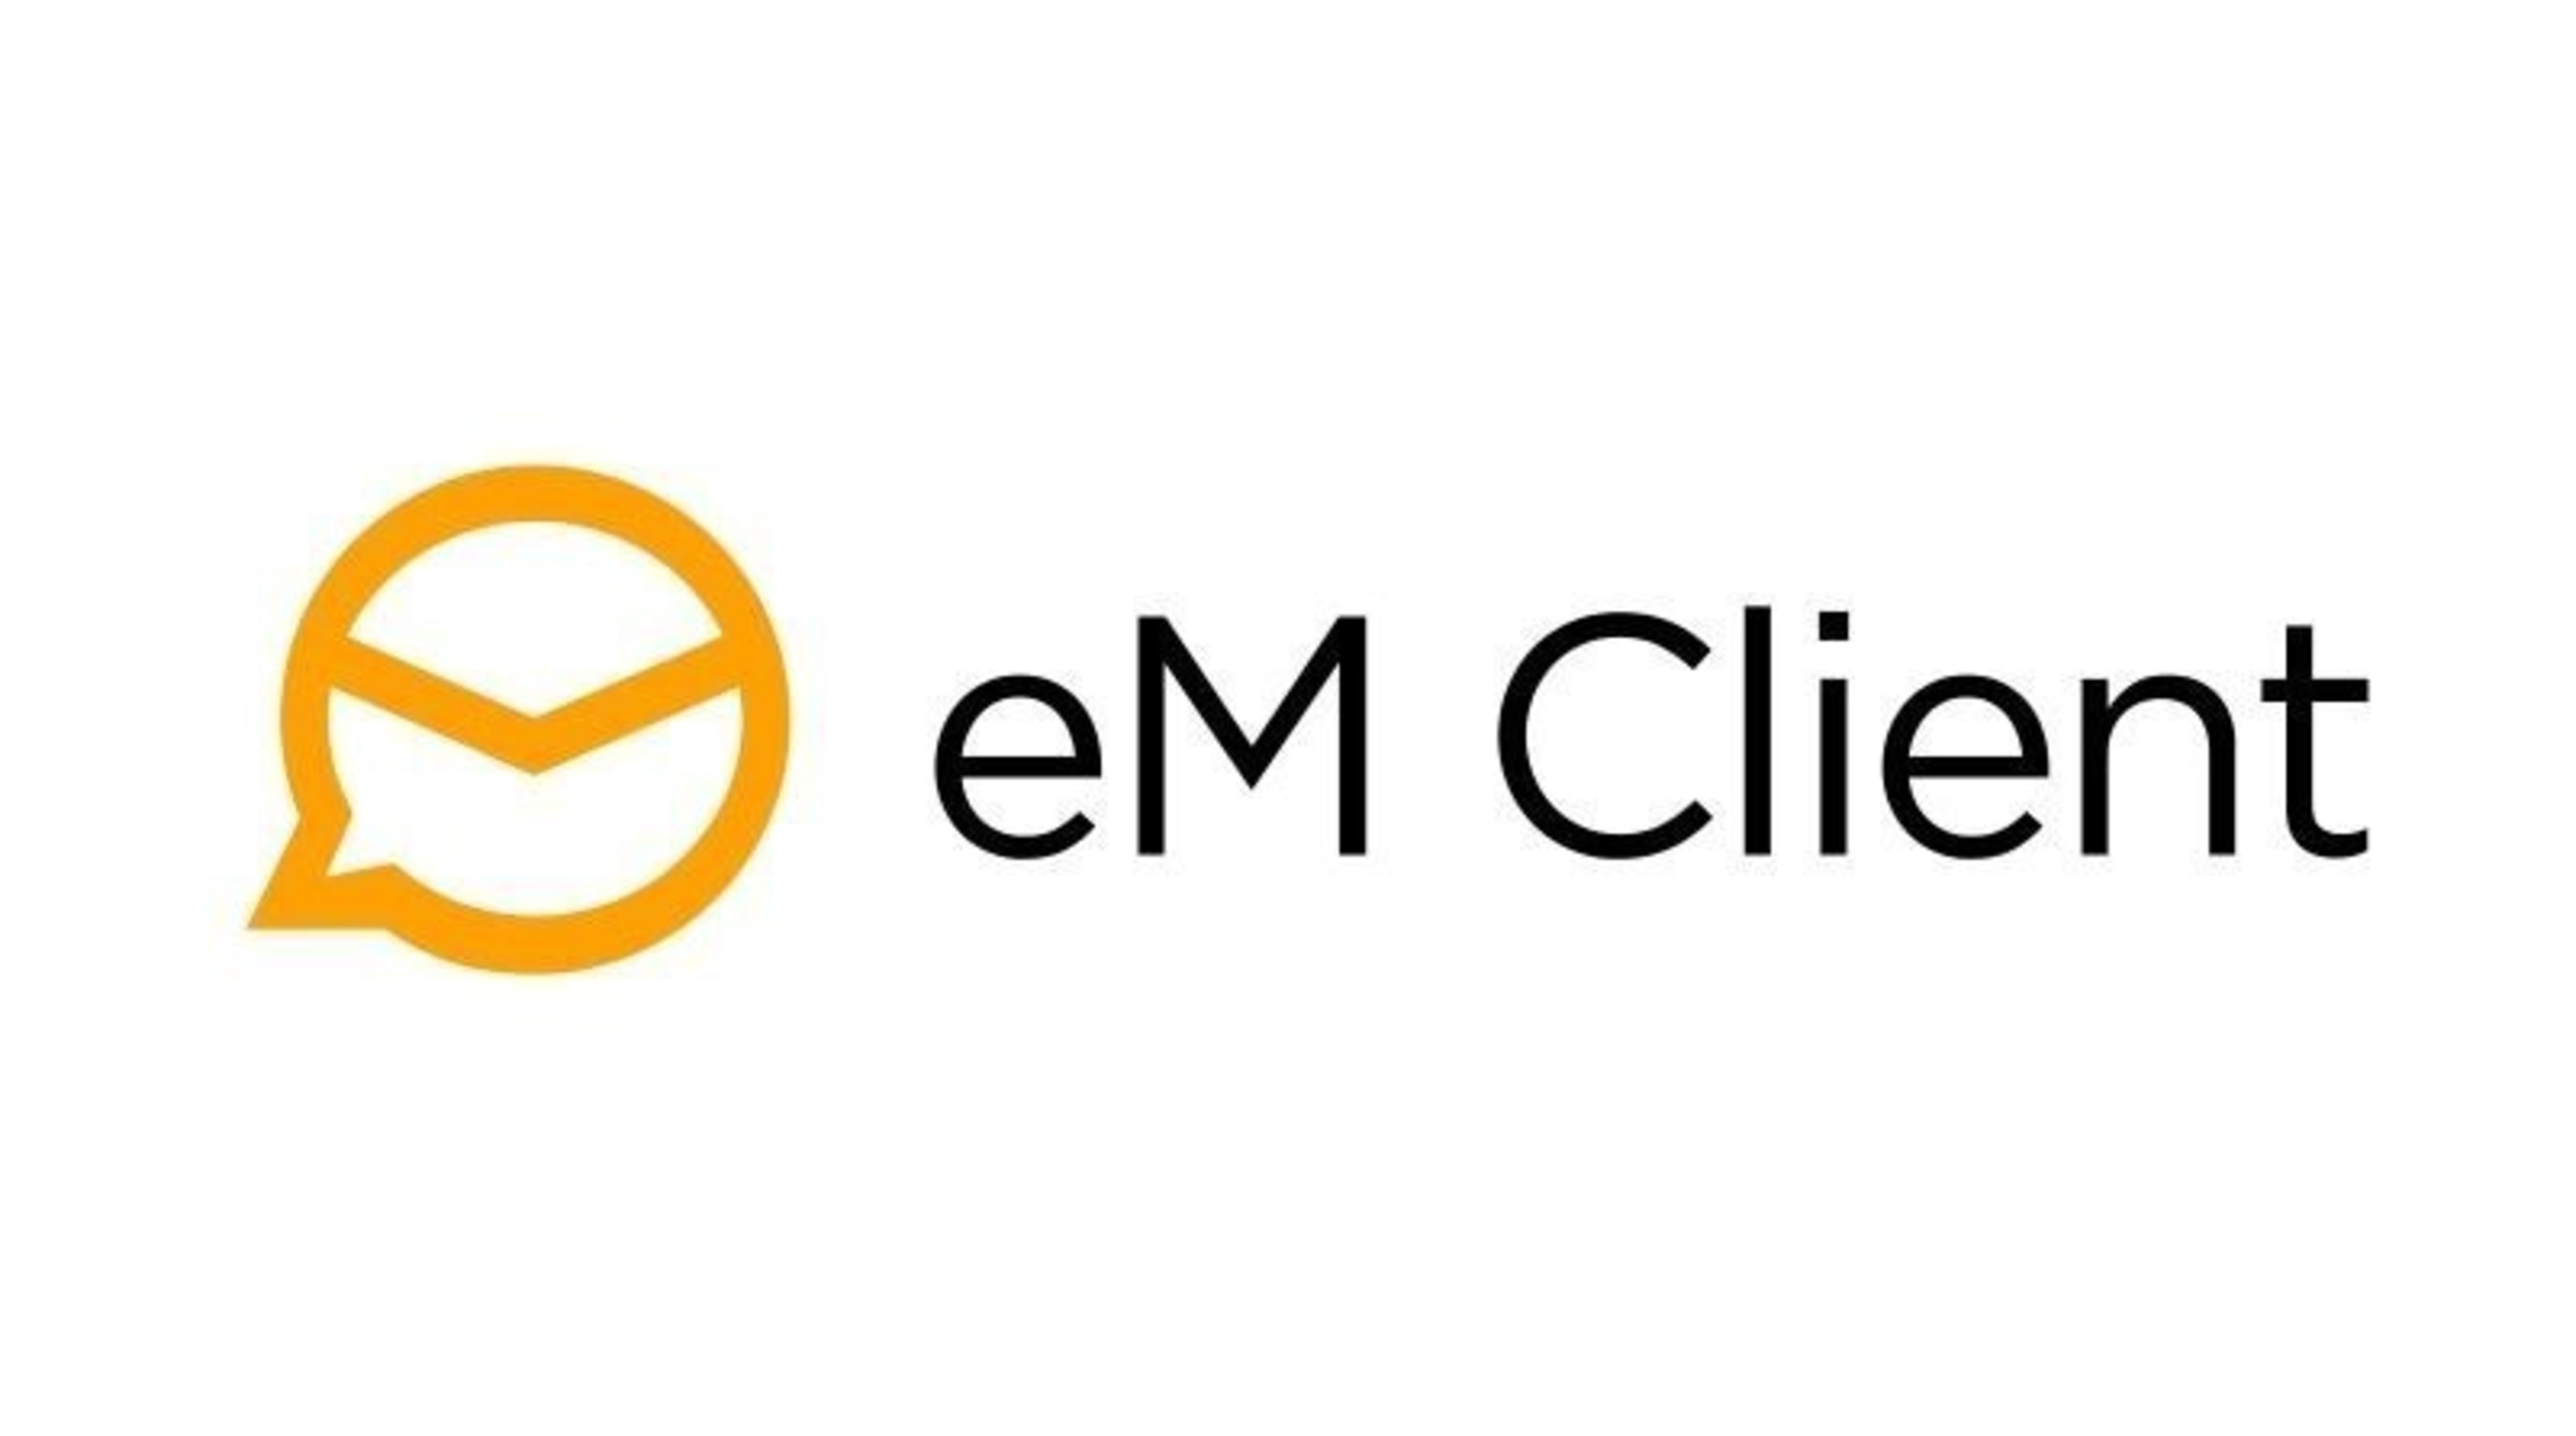 em client 7 only gets new mail when software is opened